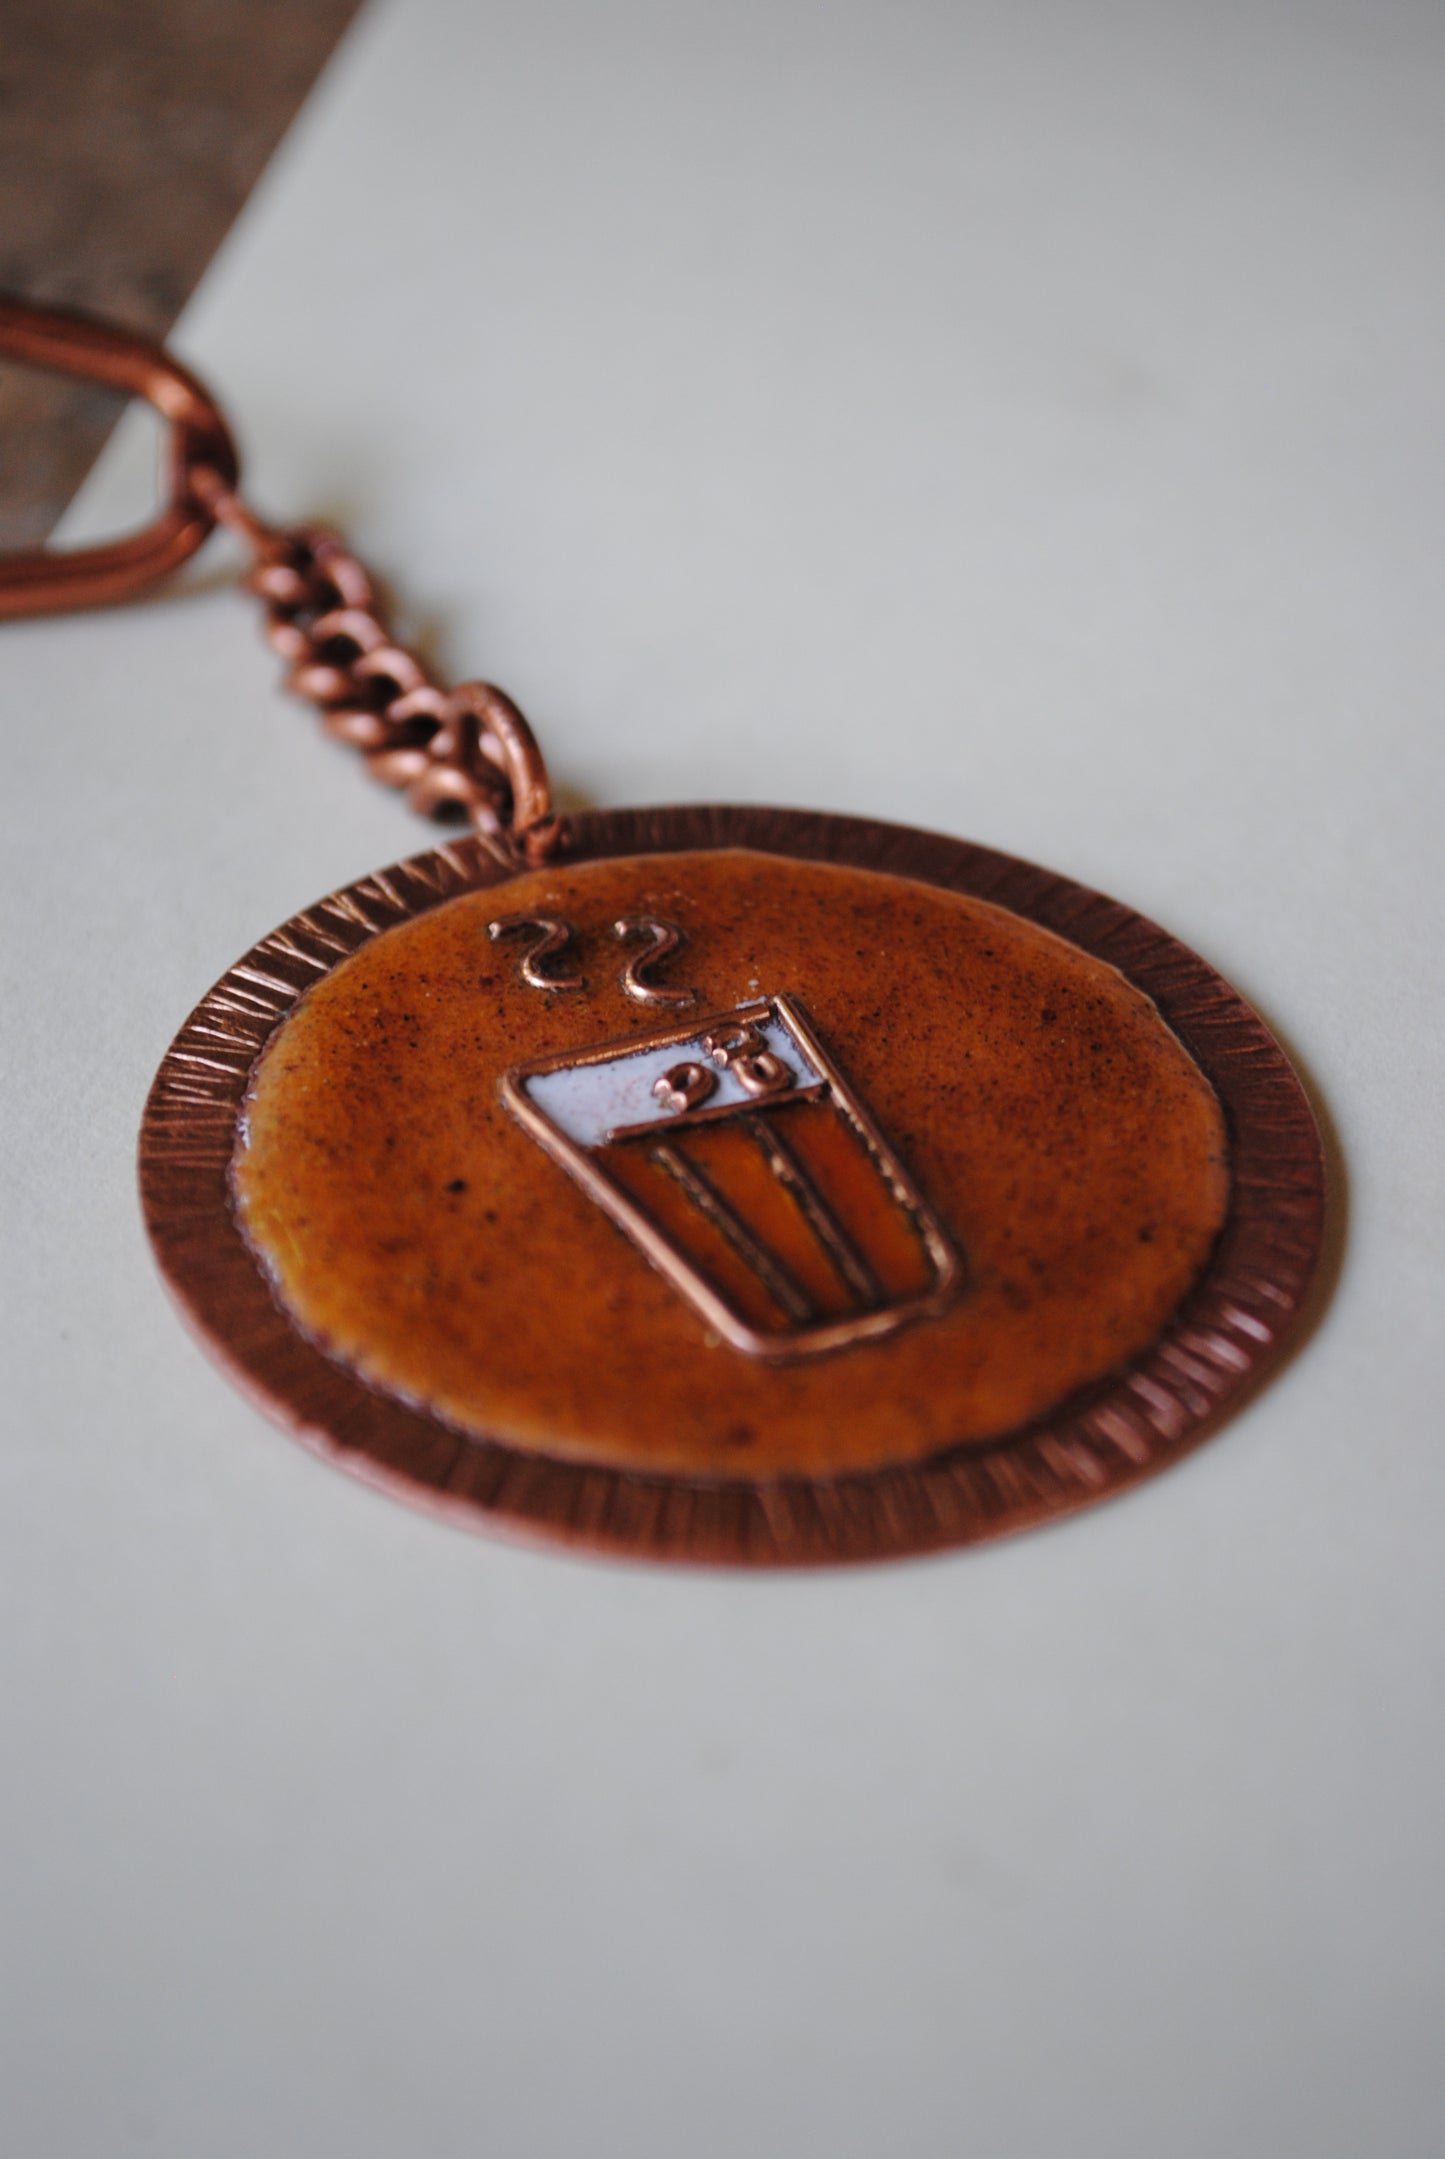 Copper enamel trinkets, funky keychains handcrafted in Maharashtra, India. Chai paani theme